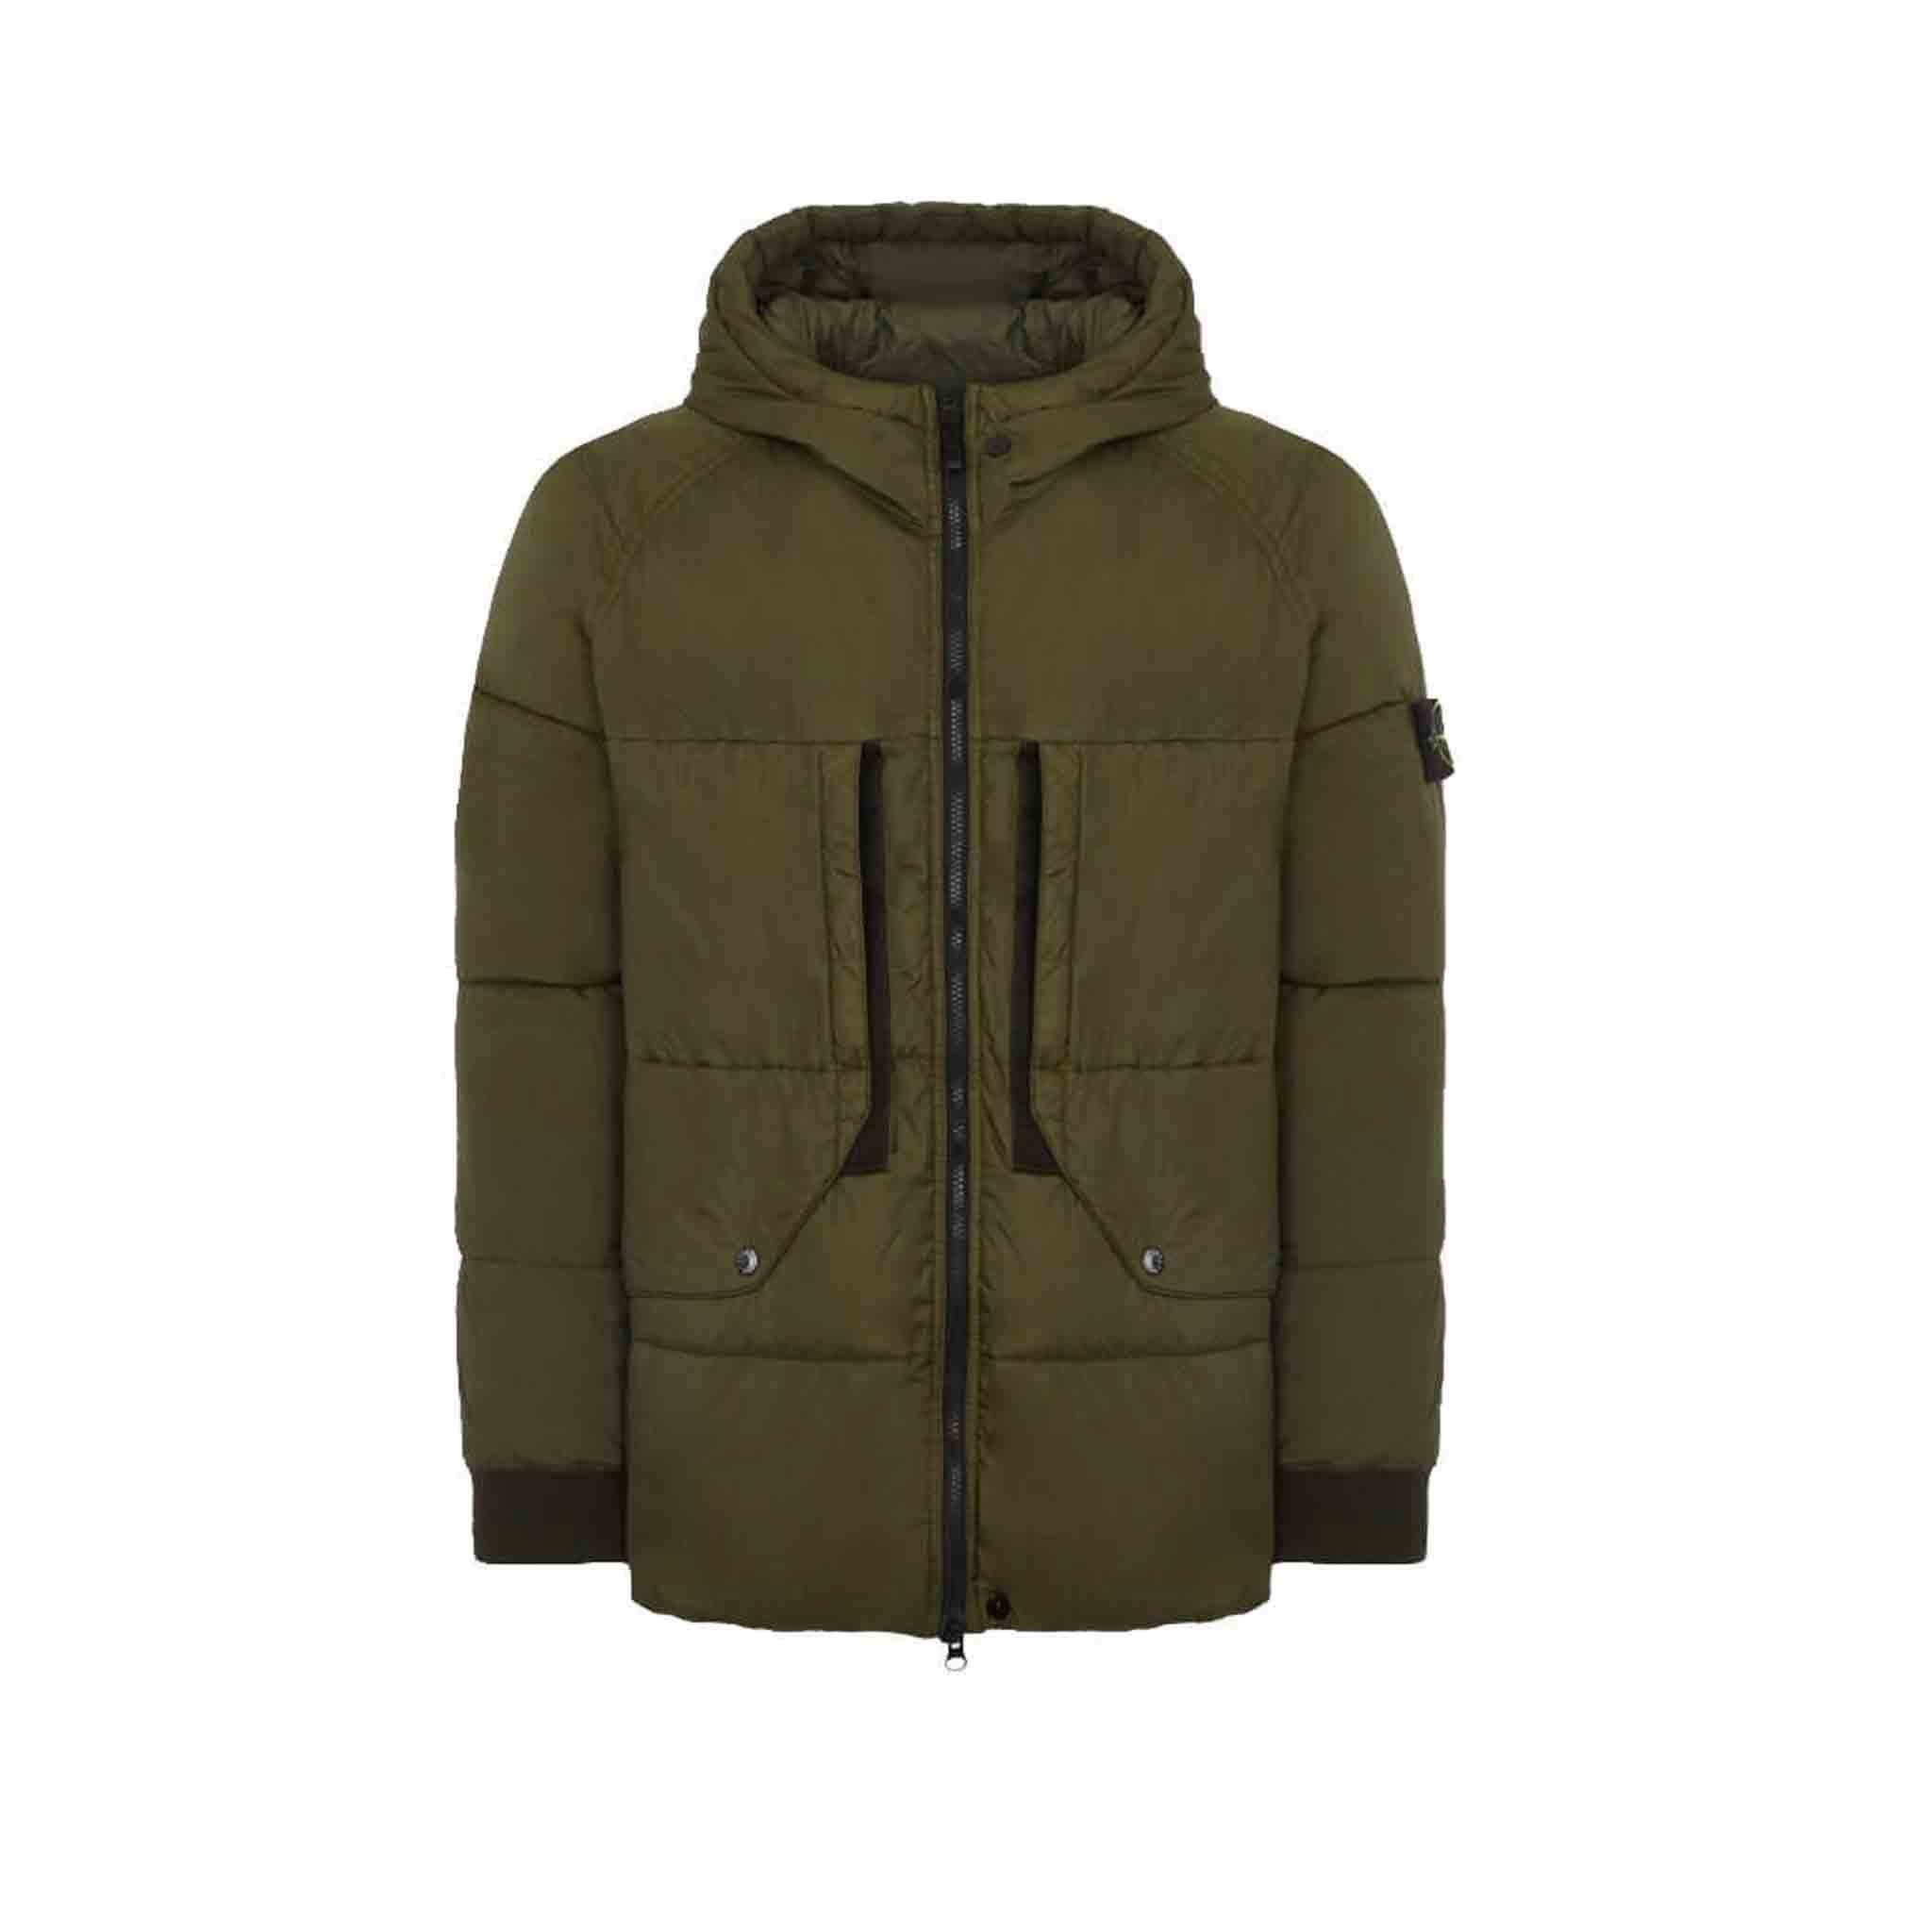 Stone Island Garment Dyed Crinkle Reps Quilted Down Jacket in Olive Green